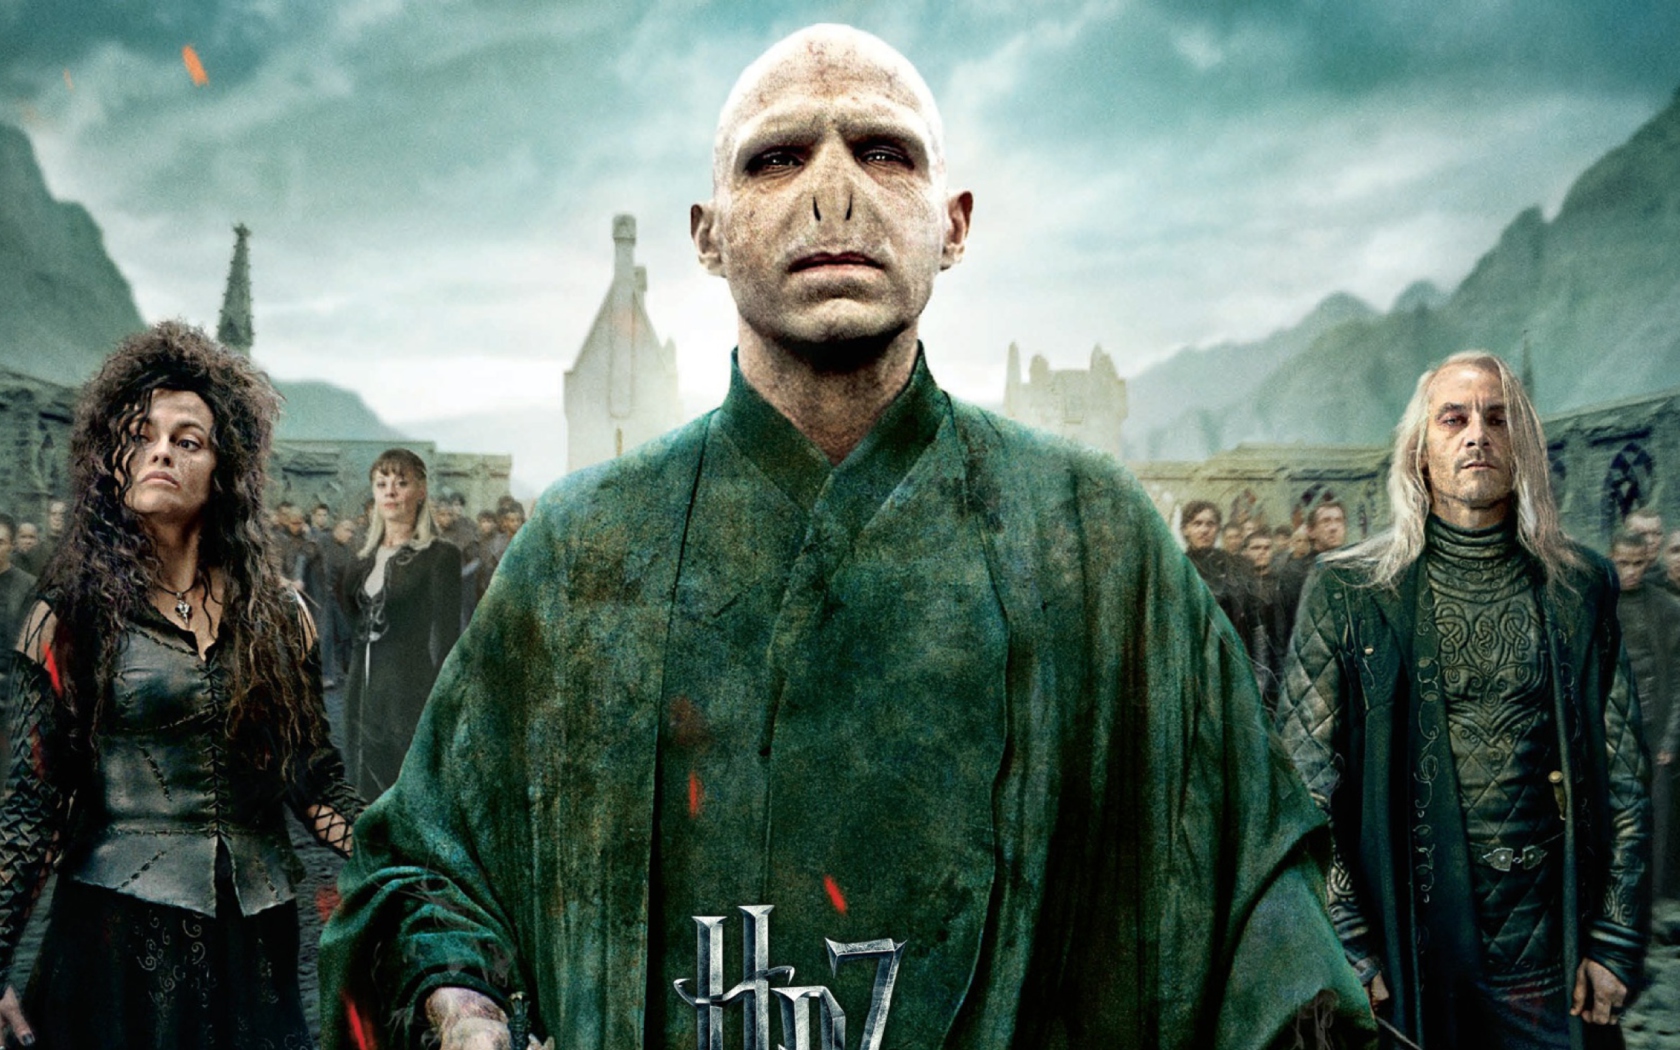 Das Harry Potter And The Deathly Hallows Part 2 Wallpaper 1680x1050